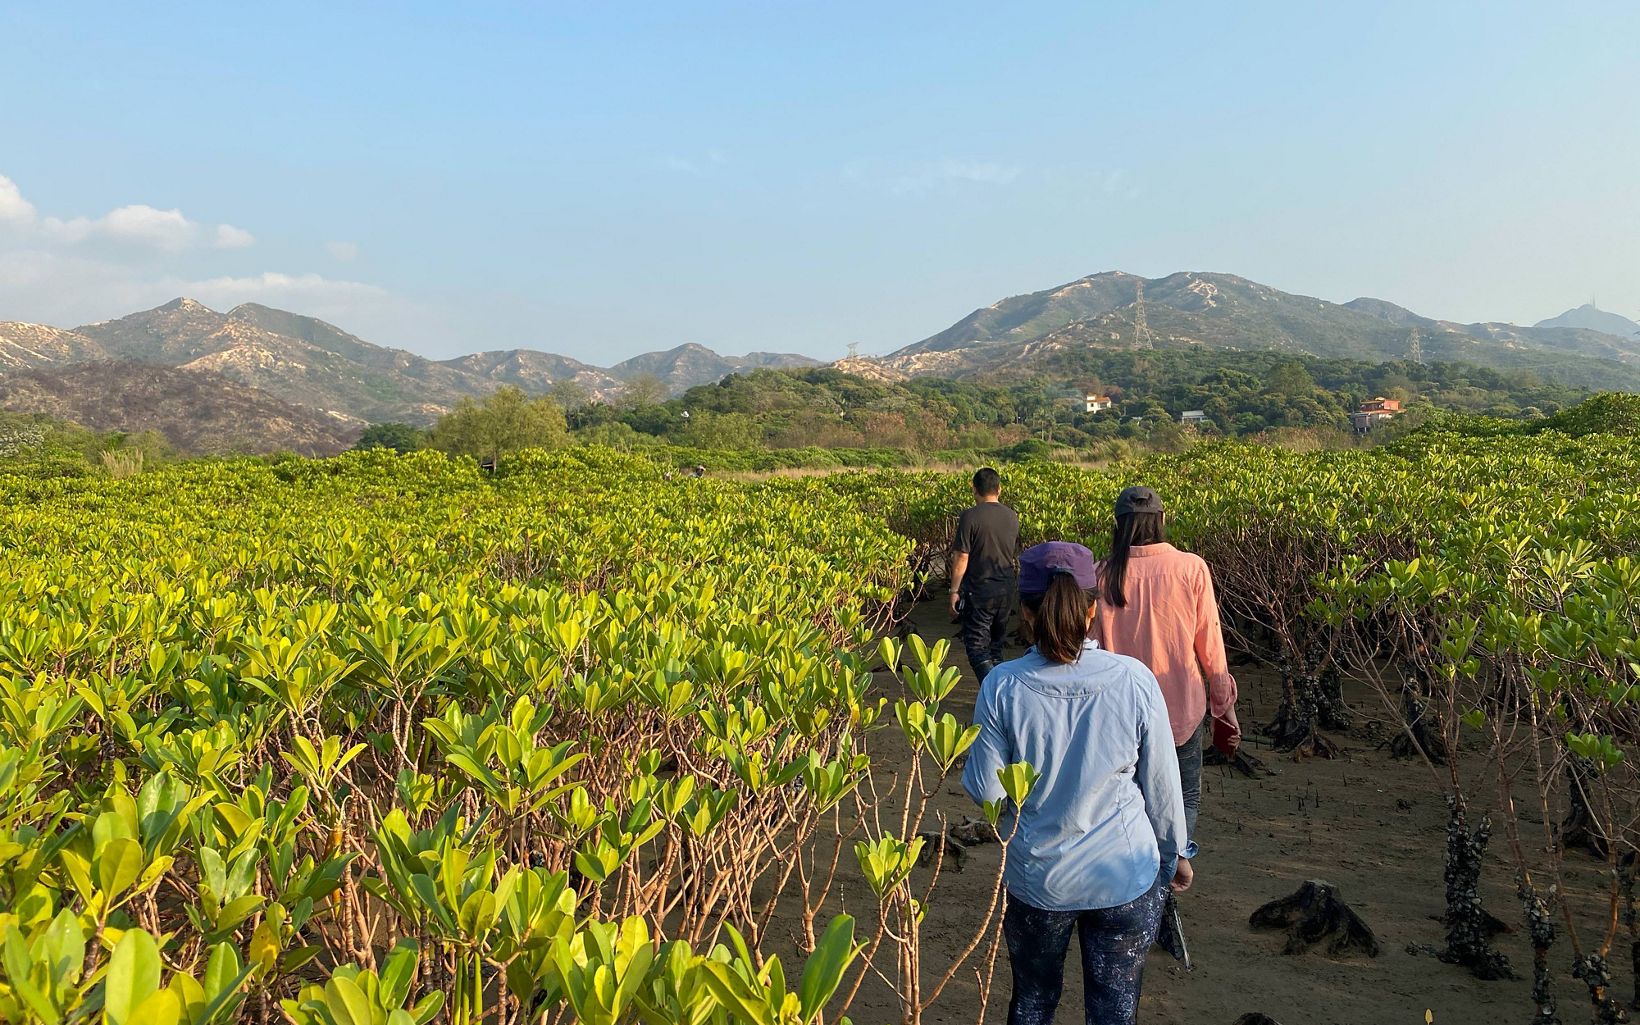 A group of students make their way through the mangroves during their field trip. © Joe Cheung/TNC